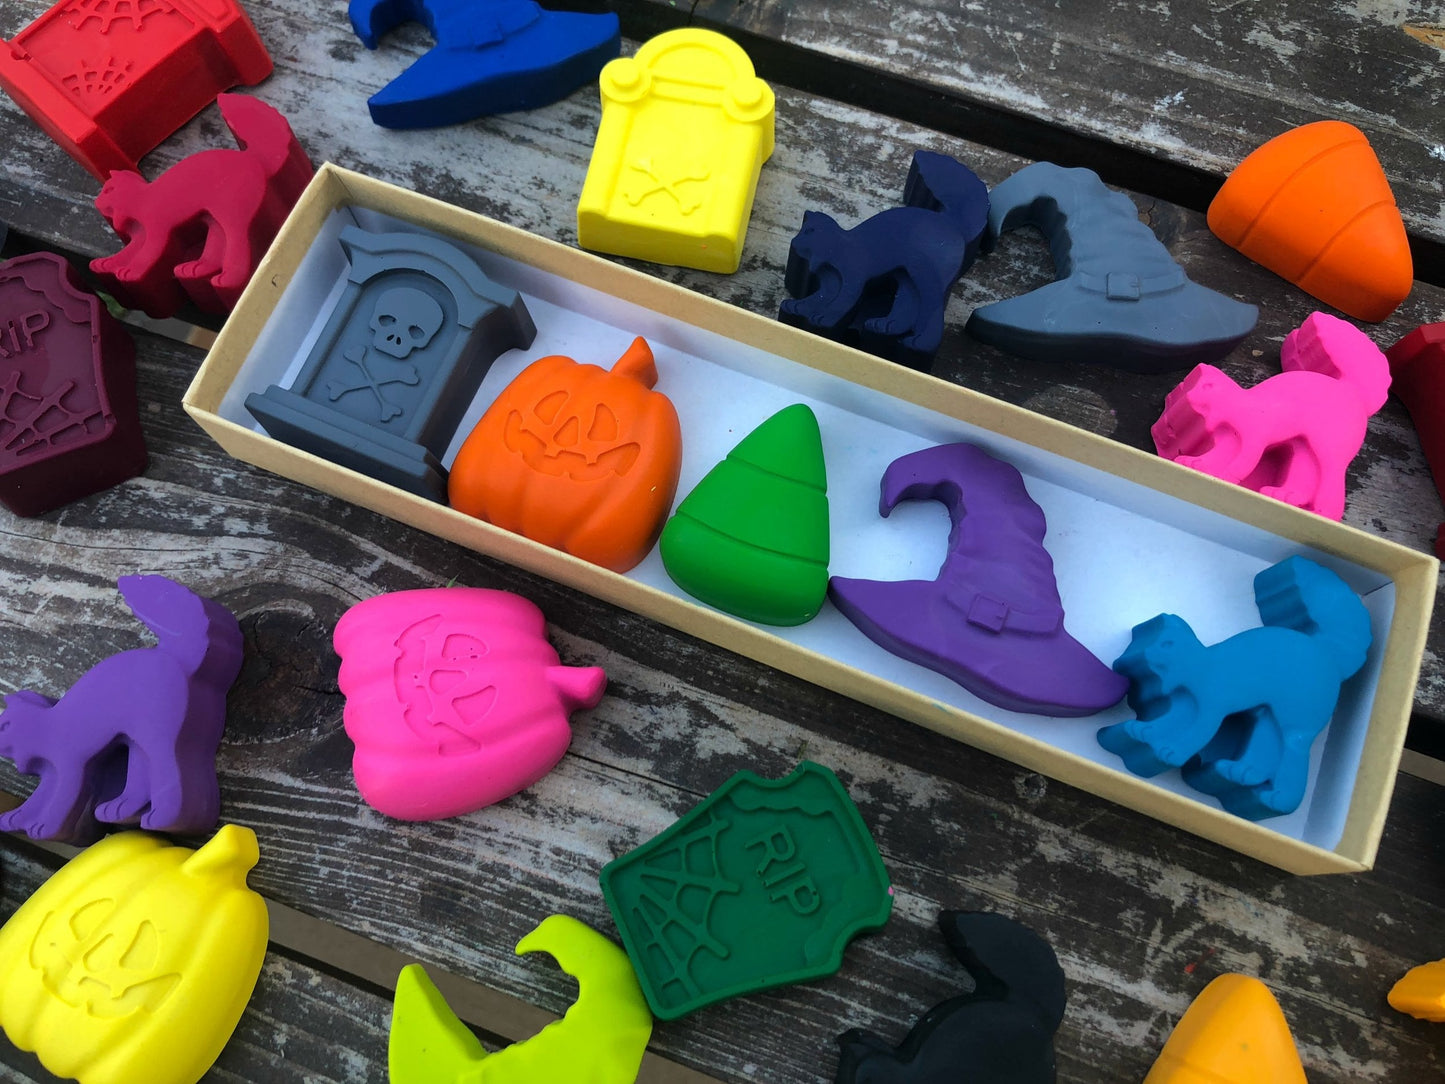 Halloween Crayons - Halloween Treats - Halloween Gifts For Kids - Kids Gifts - Halloween Party Favors - Kids Party Favors - Trick Or Treat